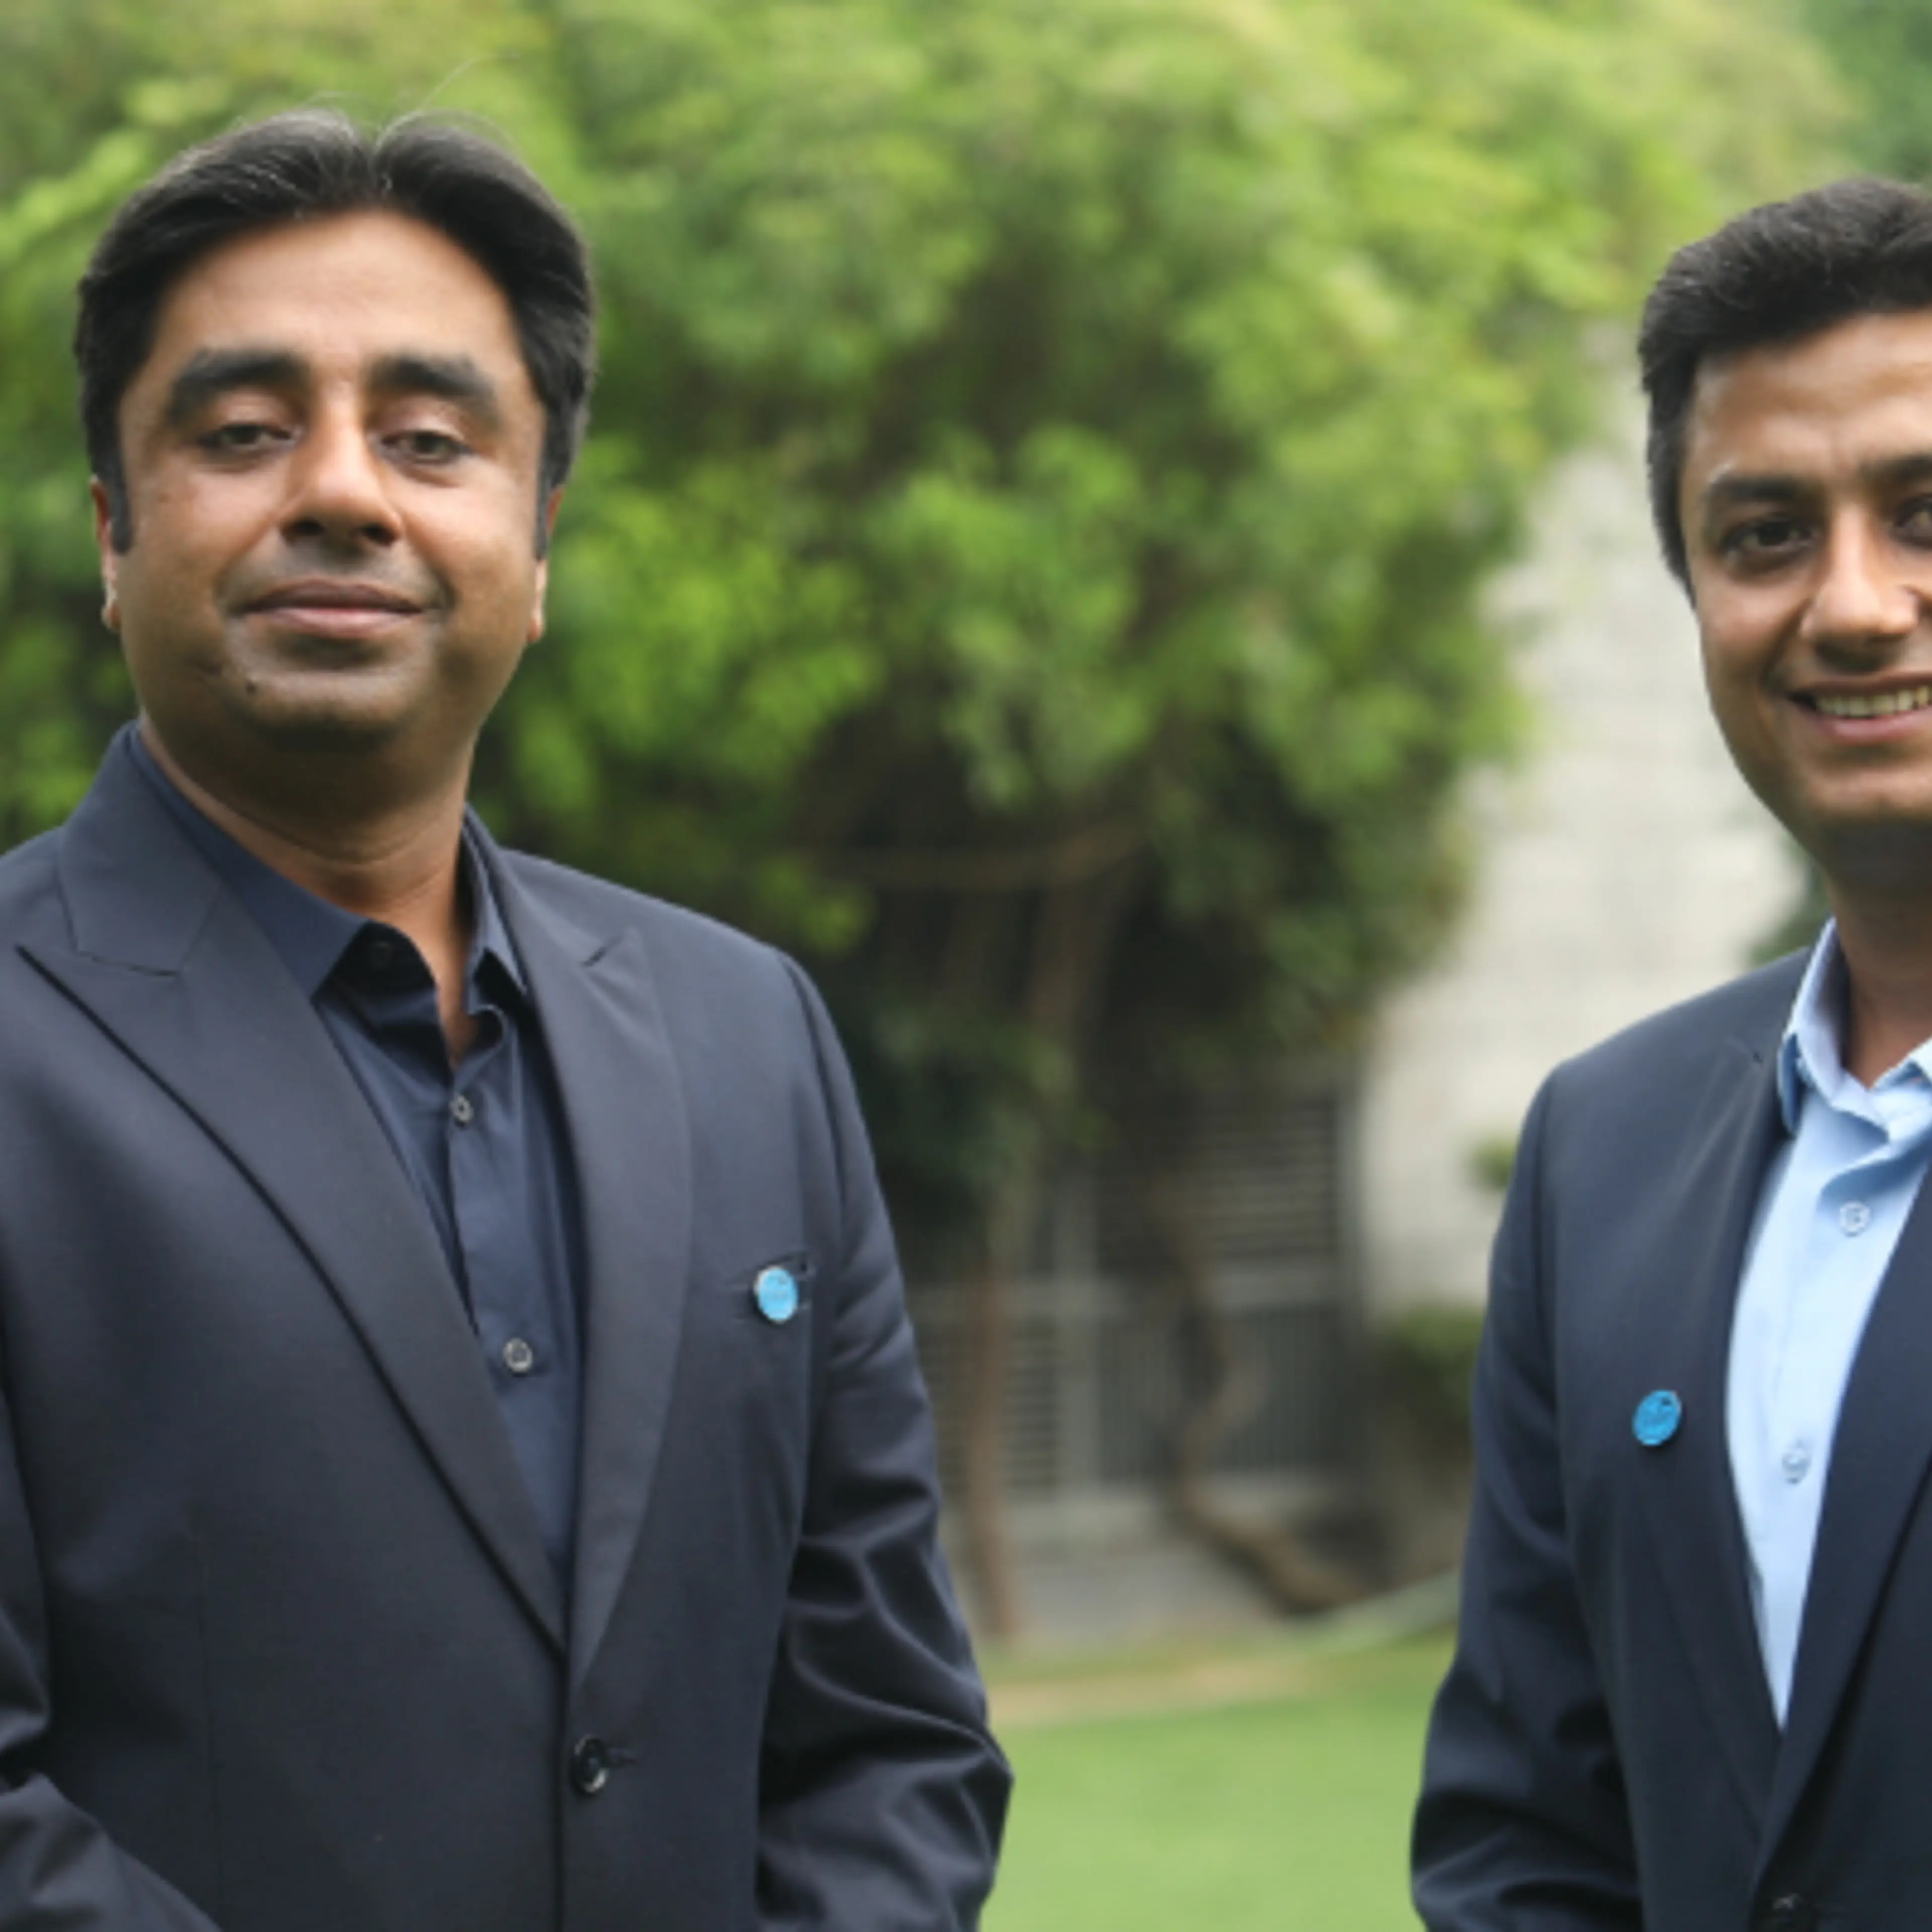 These UP-based tobacco business owners stepped out of their comfort zone to build a Rs 908 crore dairy products business